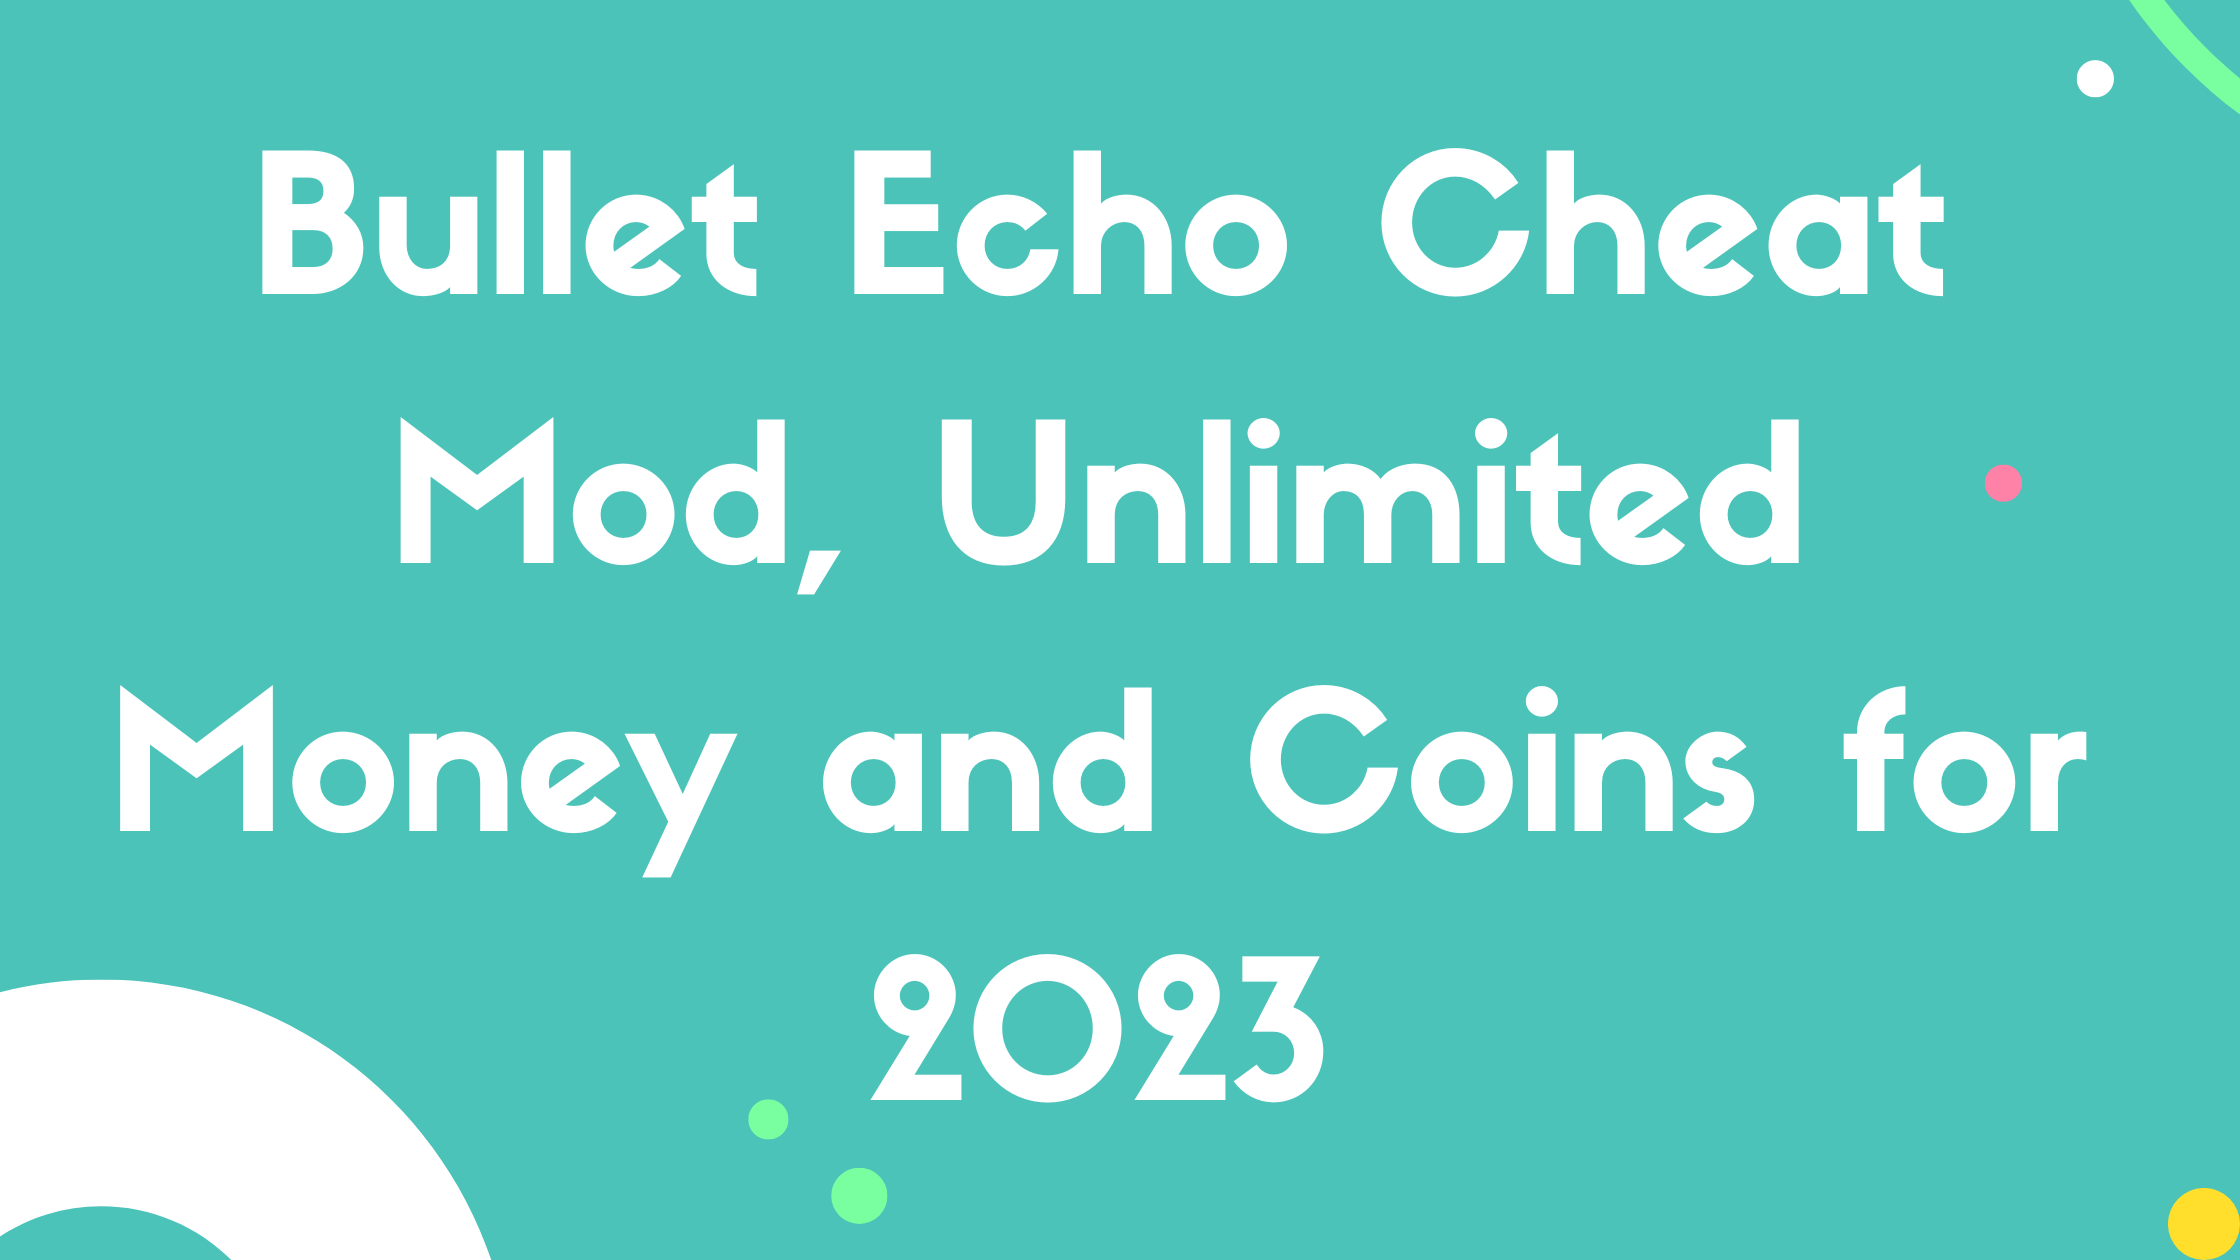 Bullet Echo Cheat Mod, Unlimited Money and Coins for 2023